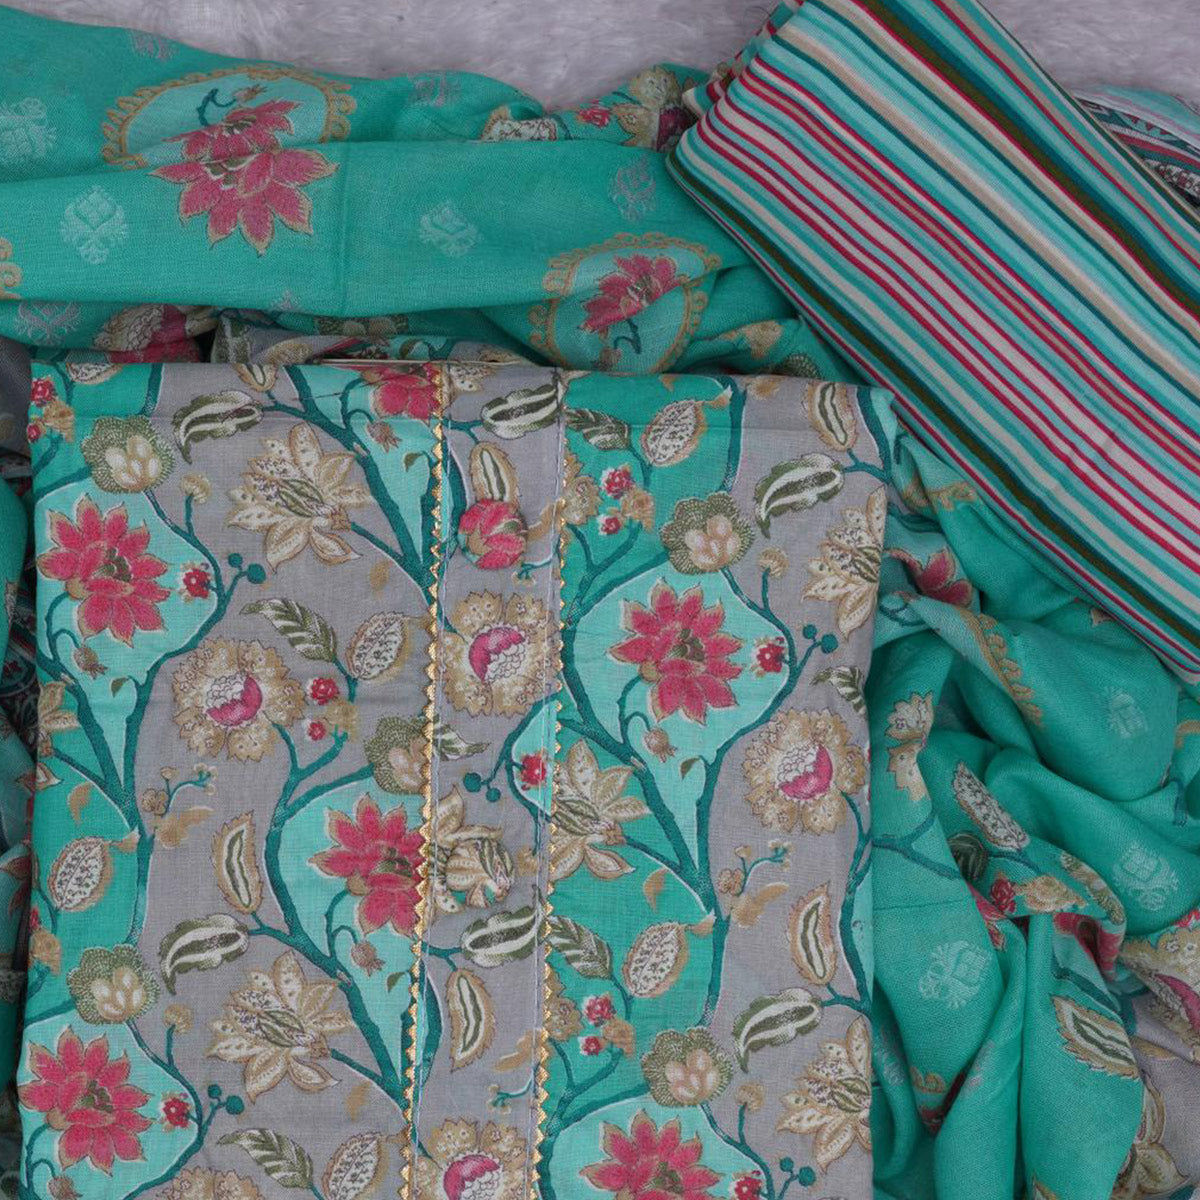 Rama Green Floral Printed Cotton Blend Dress Material